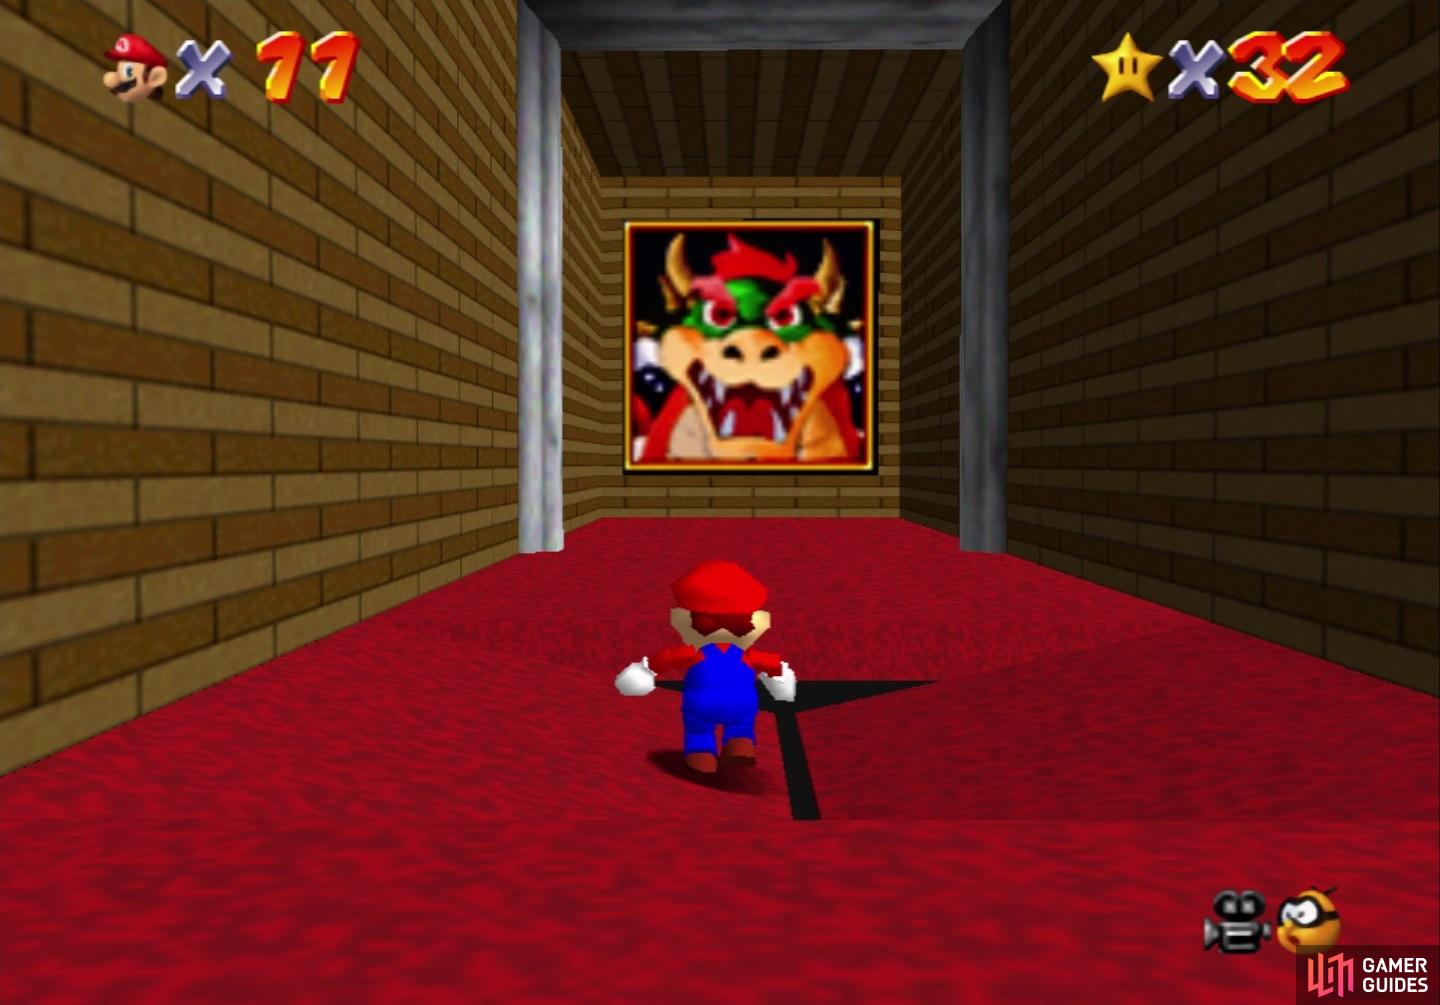 Before you reach the end of the hallway, a trap door will take you to Bowser's stage